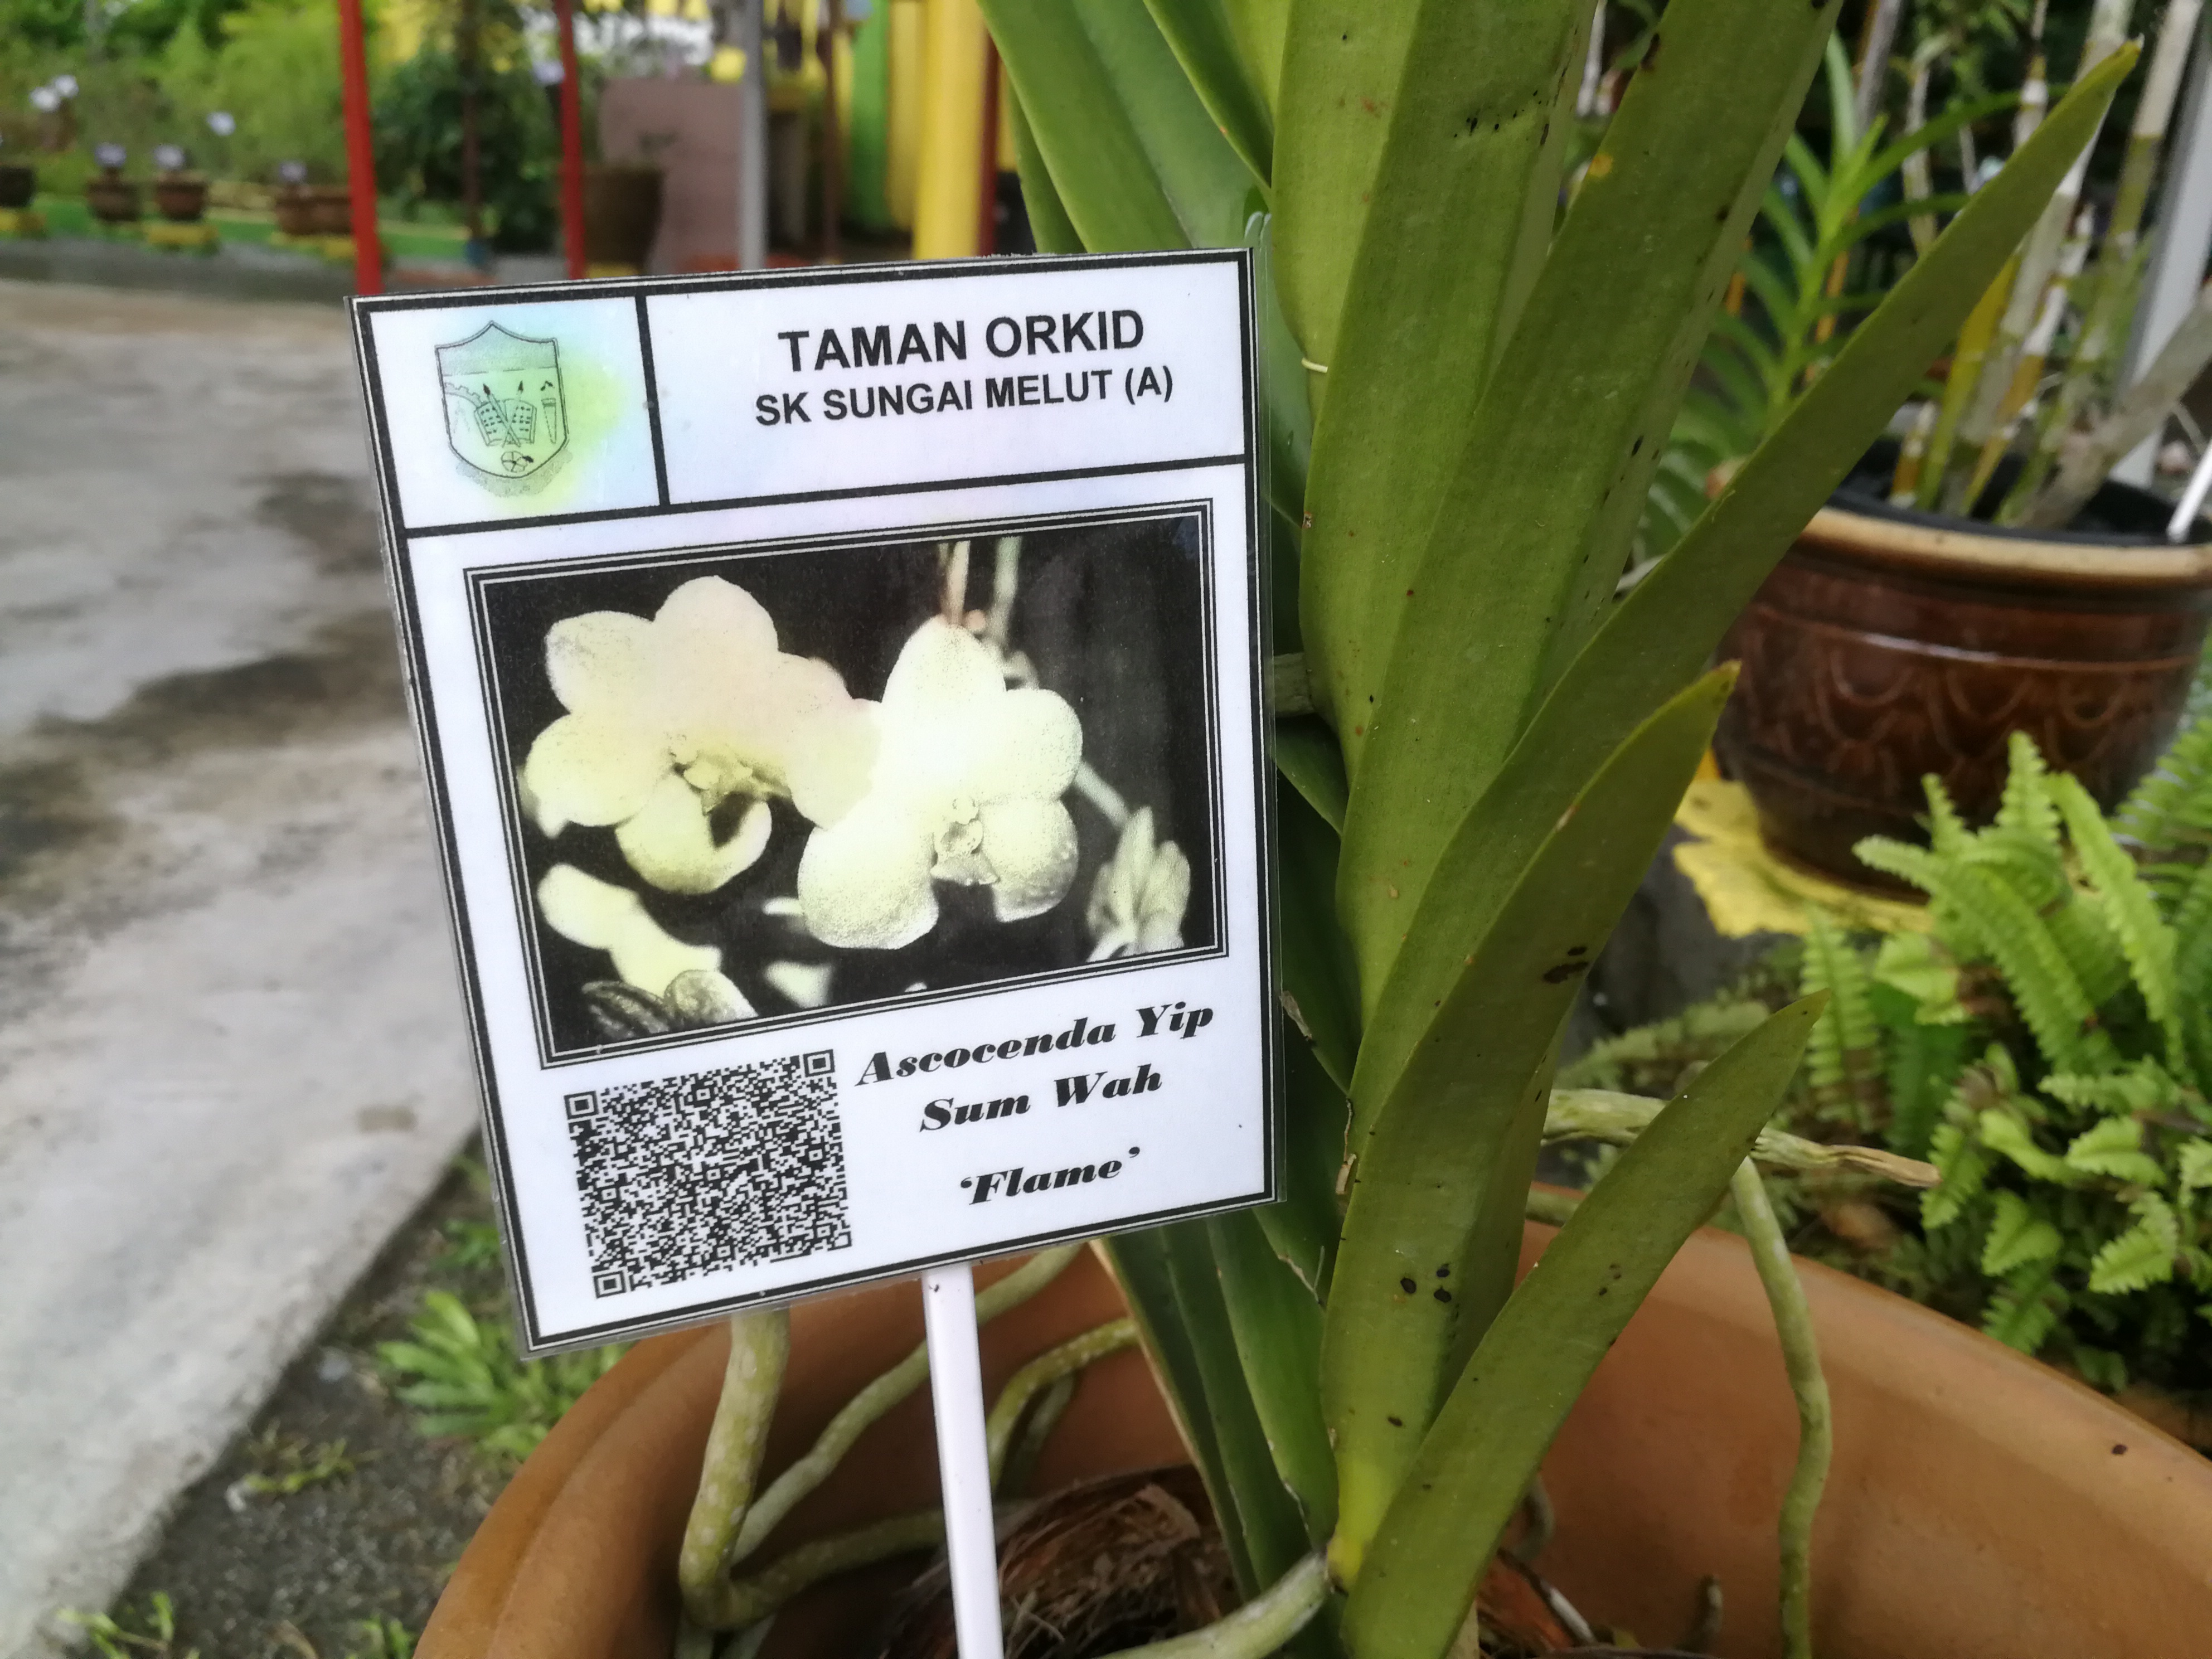 An info tag at the orchid garden.